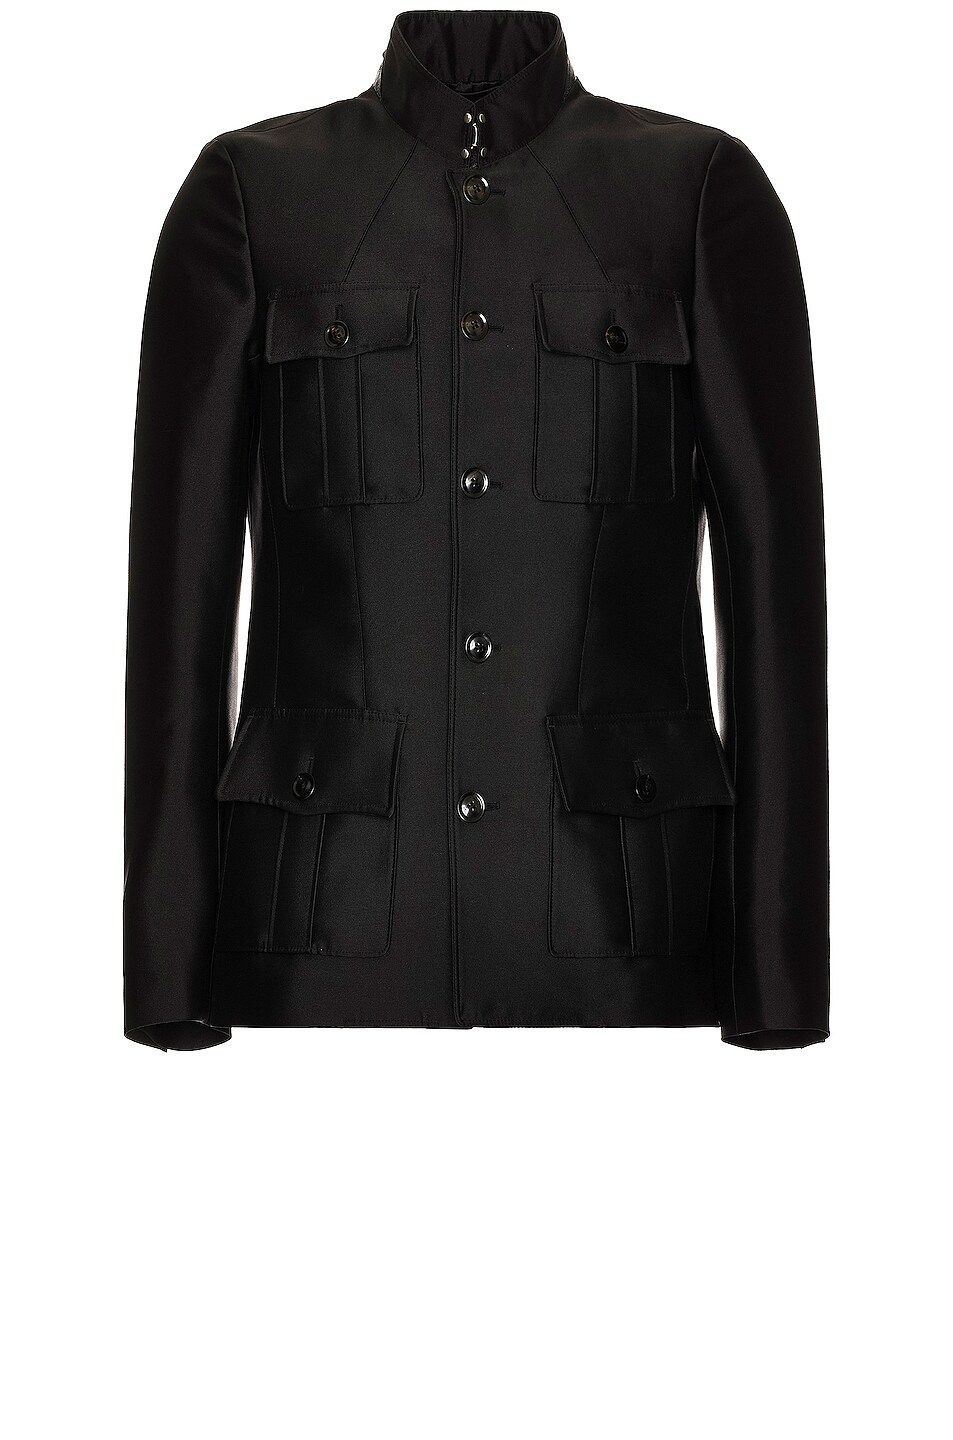 Image 1 of TOM FORD Military Peacoat Jacket in Black